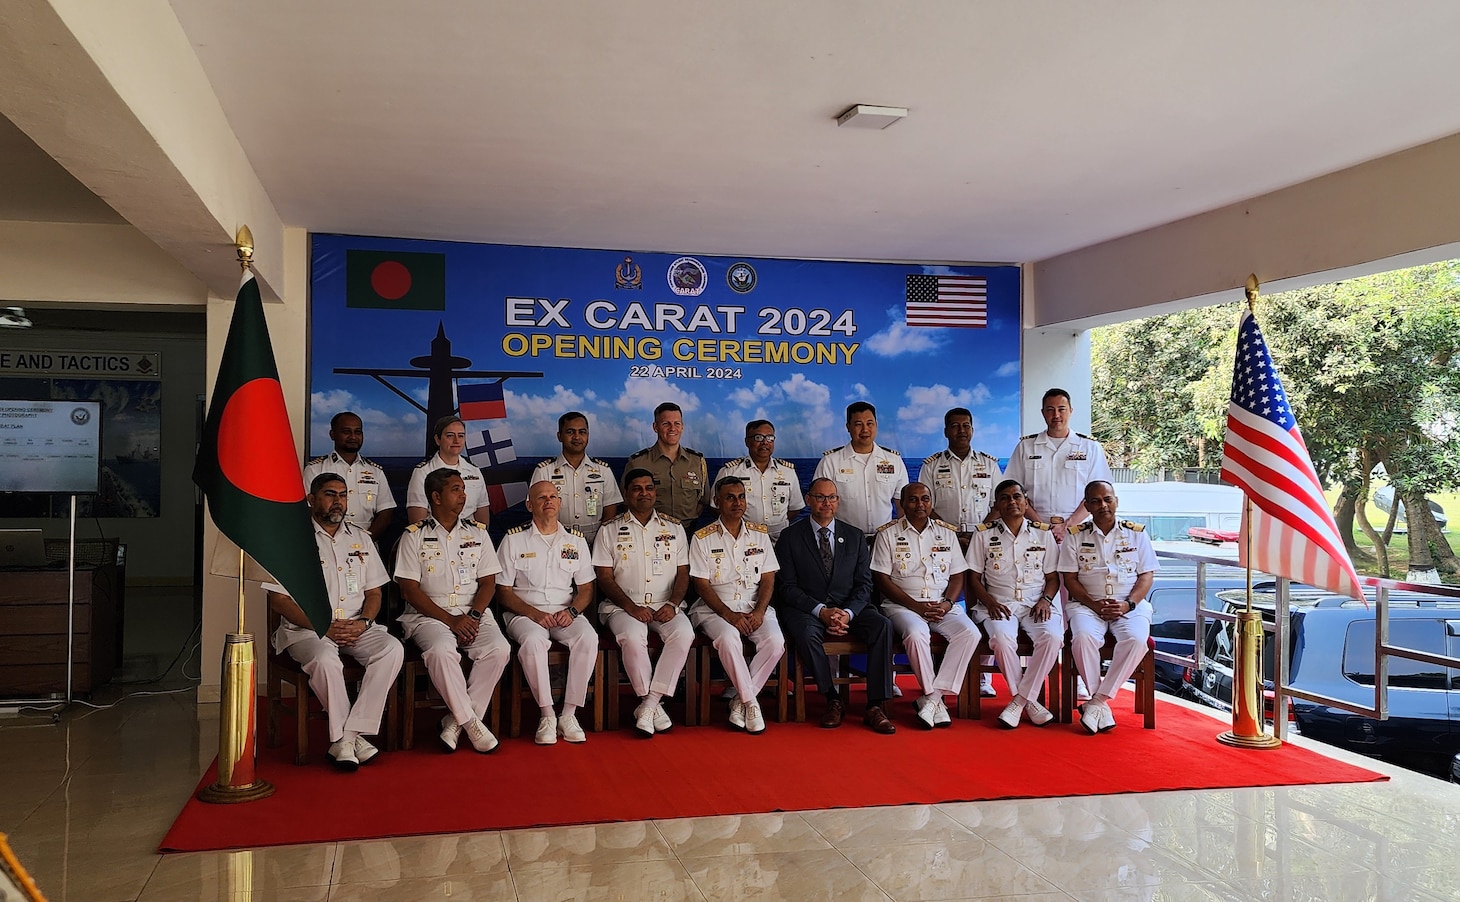 240422-N-NR876-1252 CHATTOGRAM, Bangladesh (April 22, 2024) - Distinguished guests from the U.S. Embassy to Bangladesh, Navy, Marine Corps, and Bangladesh Navy pose for a group photo after the opening ceremony of Cooperation Afloat Readiness and Training (CARAT) Exercise Bangladesh 2024 in Chattogram, Bangladesh Apr. 22. CARAT Bangladesh is a week-long exercise that seeks to enhance collaboration focused on shared maritime security challenges in the region. As the 30th iteration of the CARAT series, 2024 highlights the longstanding role of CARAT as a credible venue for regional Allies and partners to address shared maritime security priorities. (U.S. Navy photo by Chief Electronics Technician Nguyet Mai)